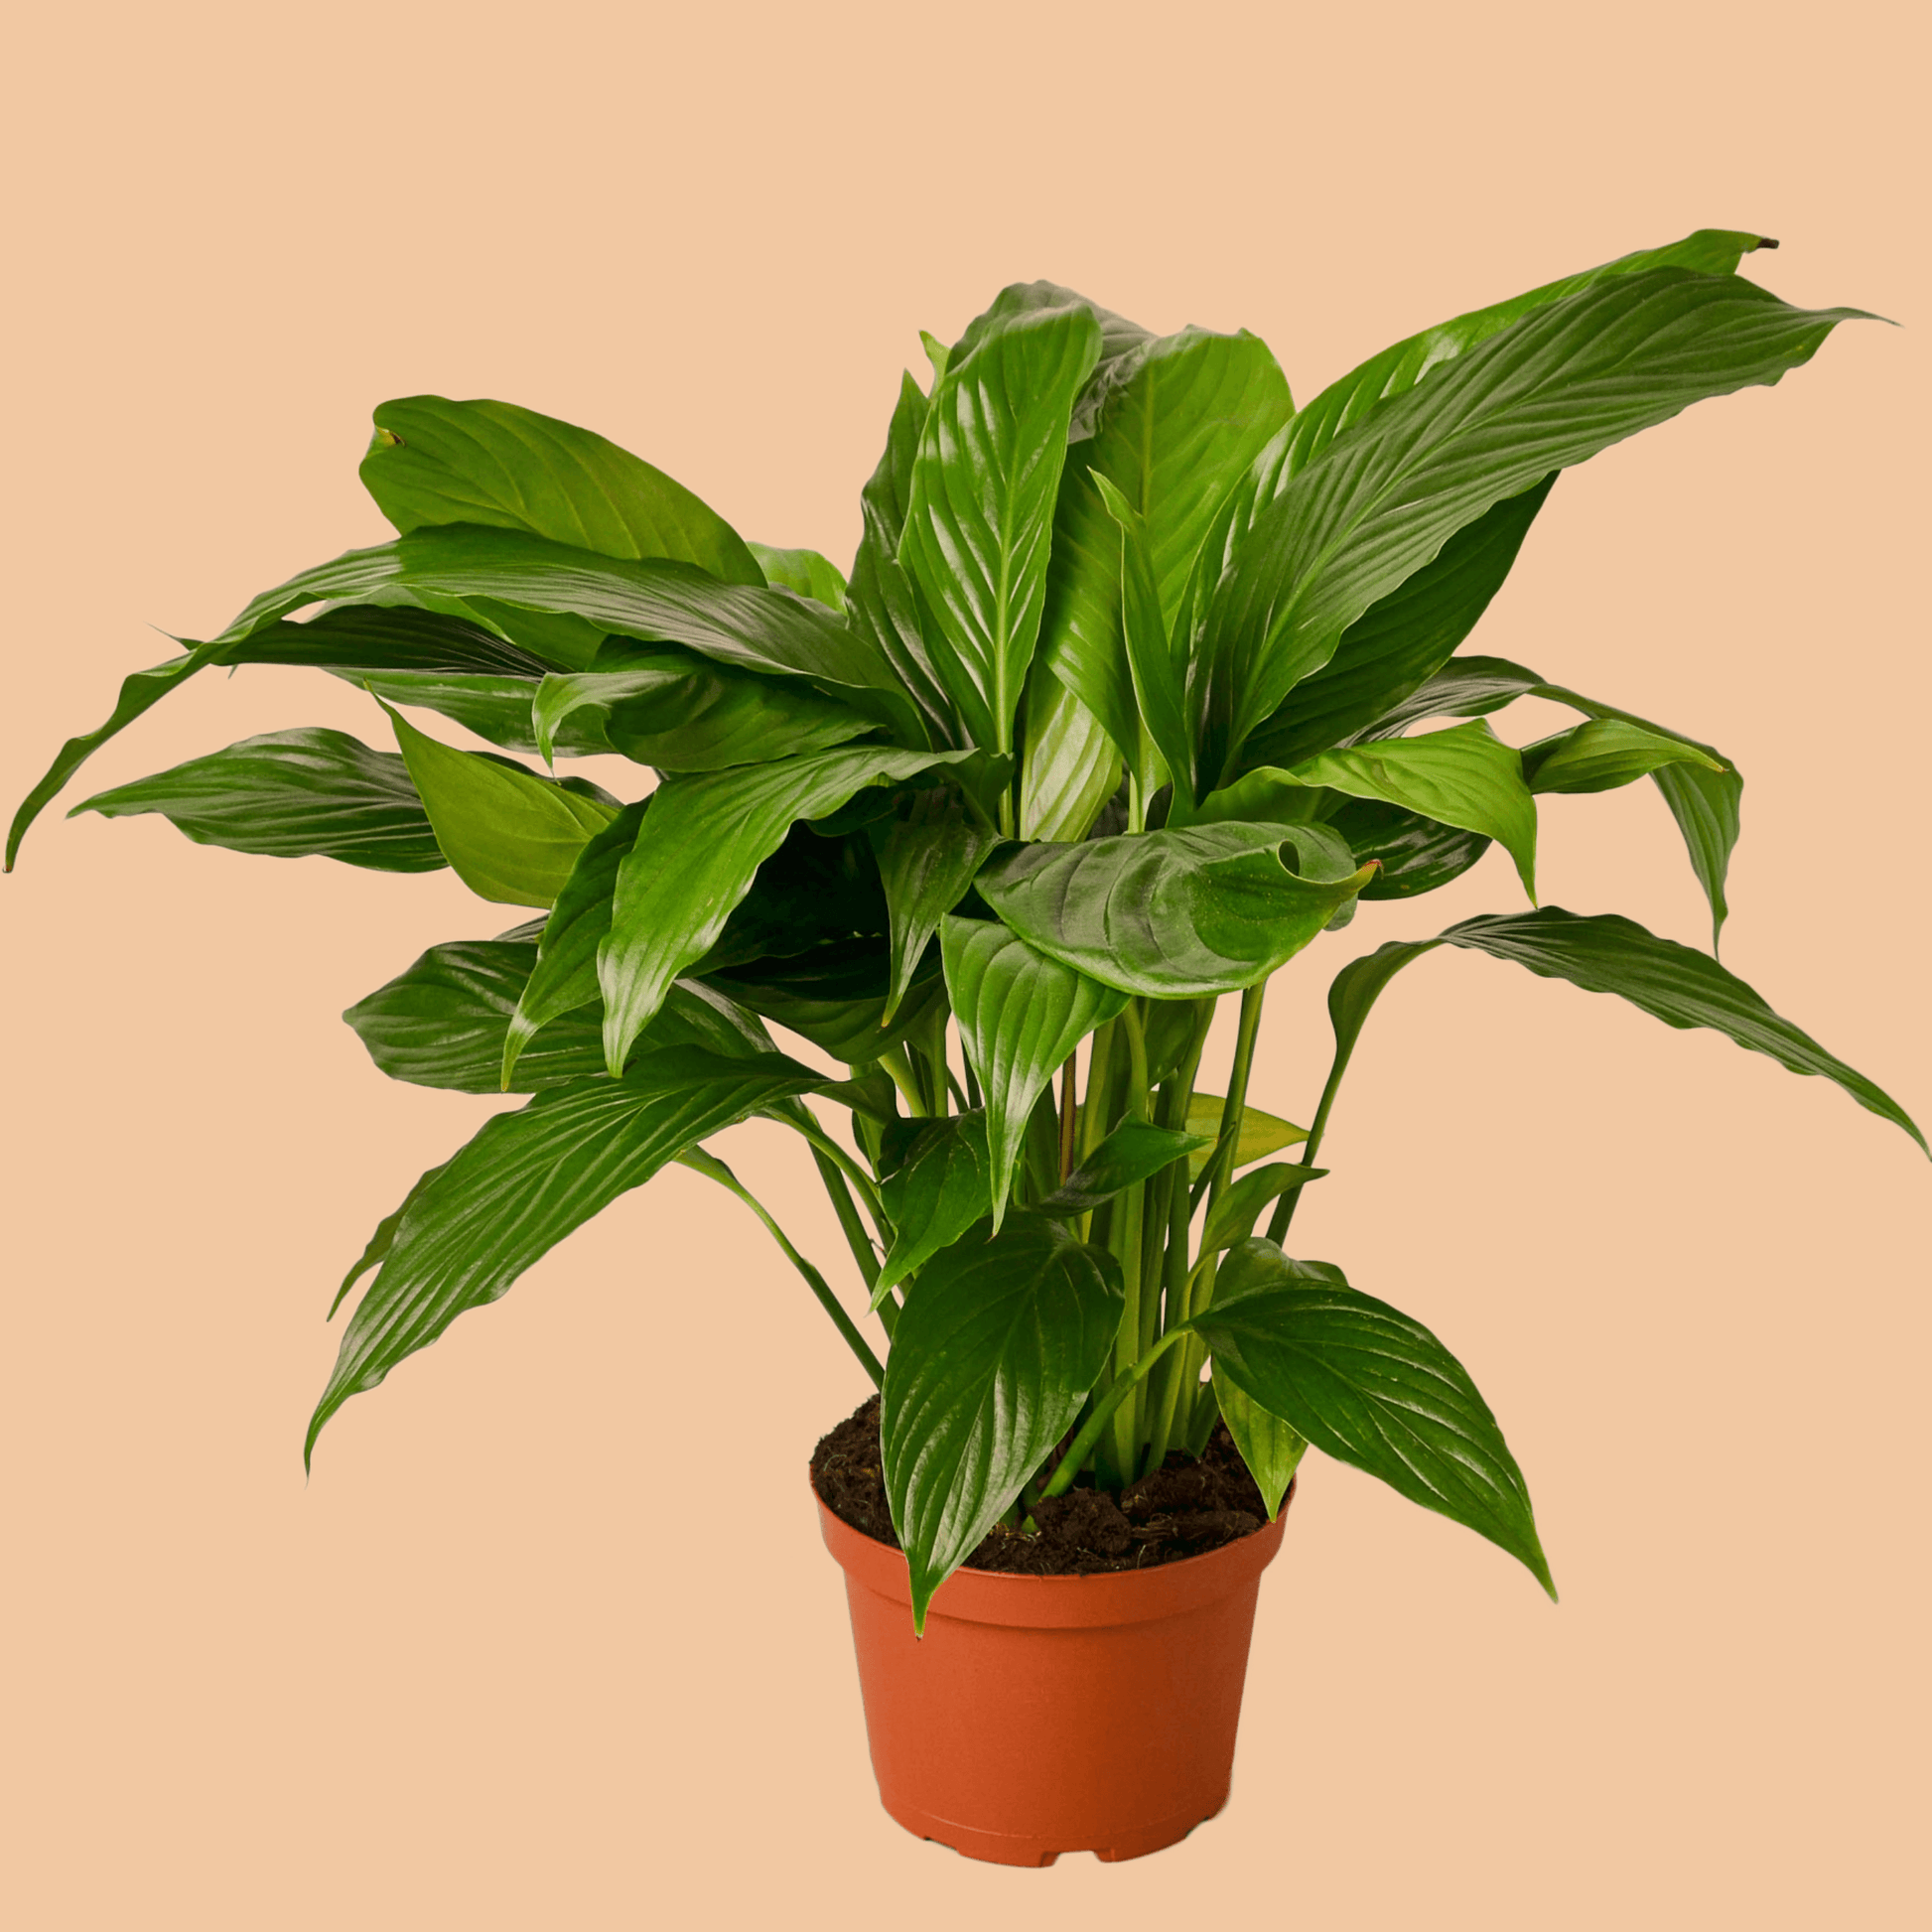 Spathiphyllum 'Peace Lily' - The Leafy Branch